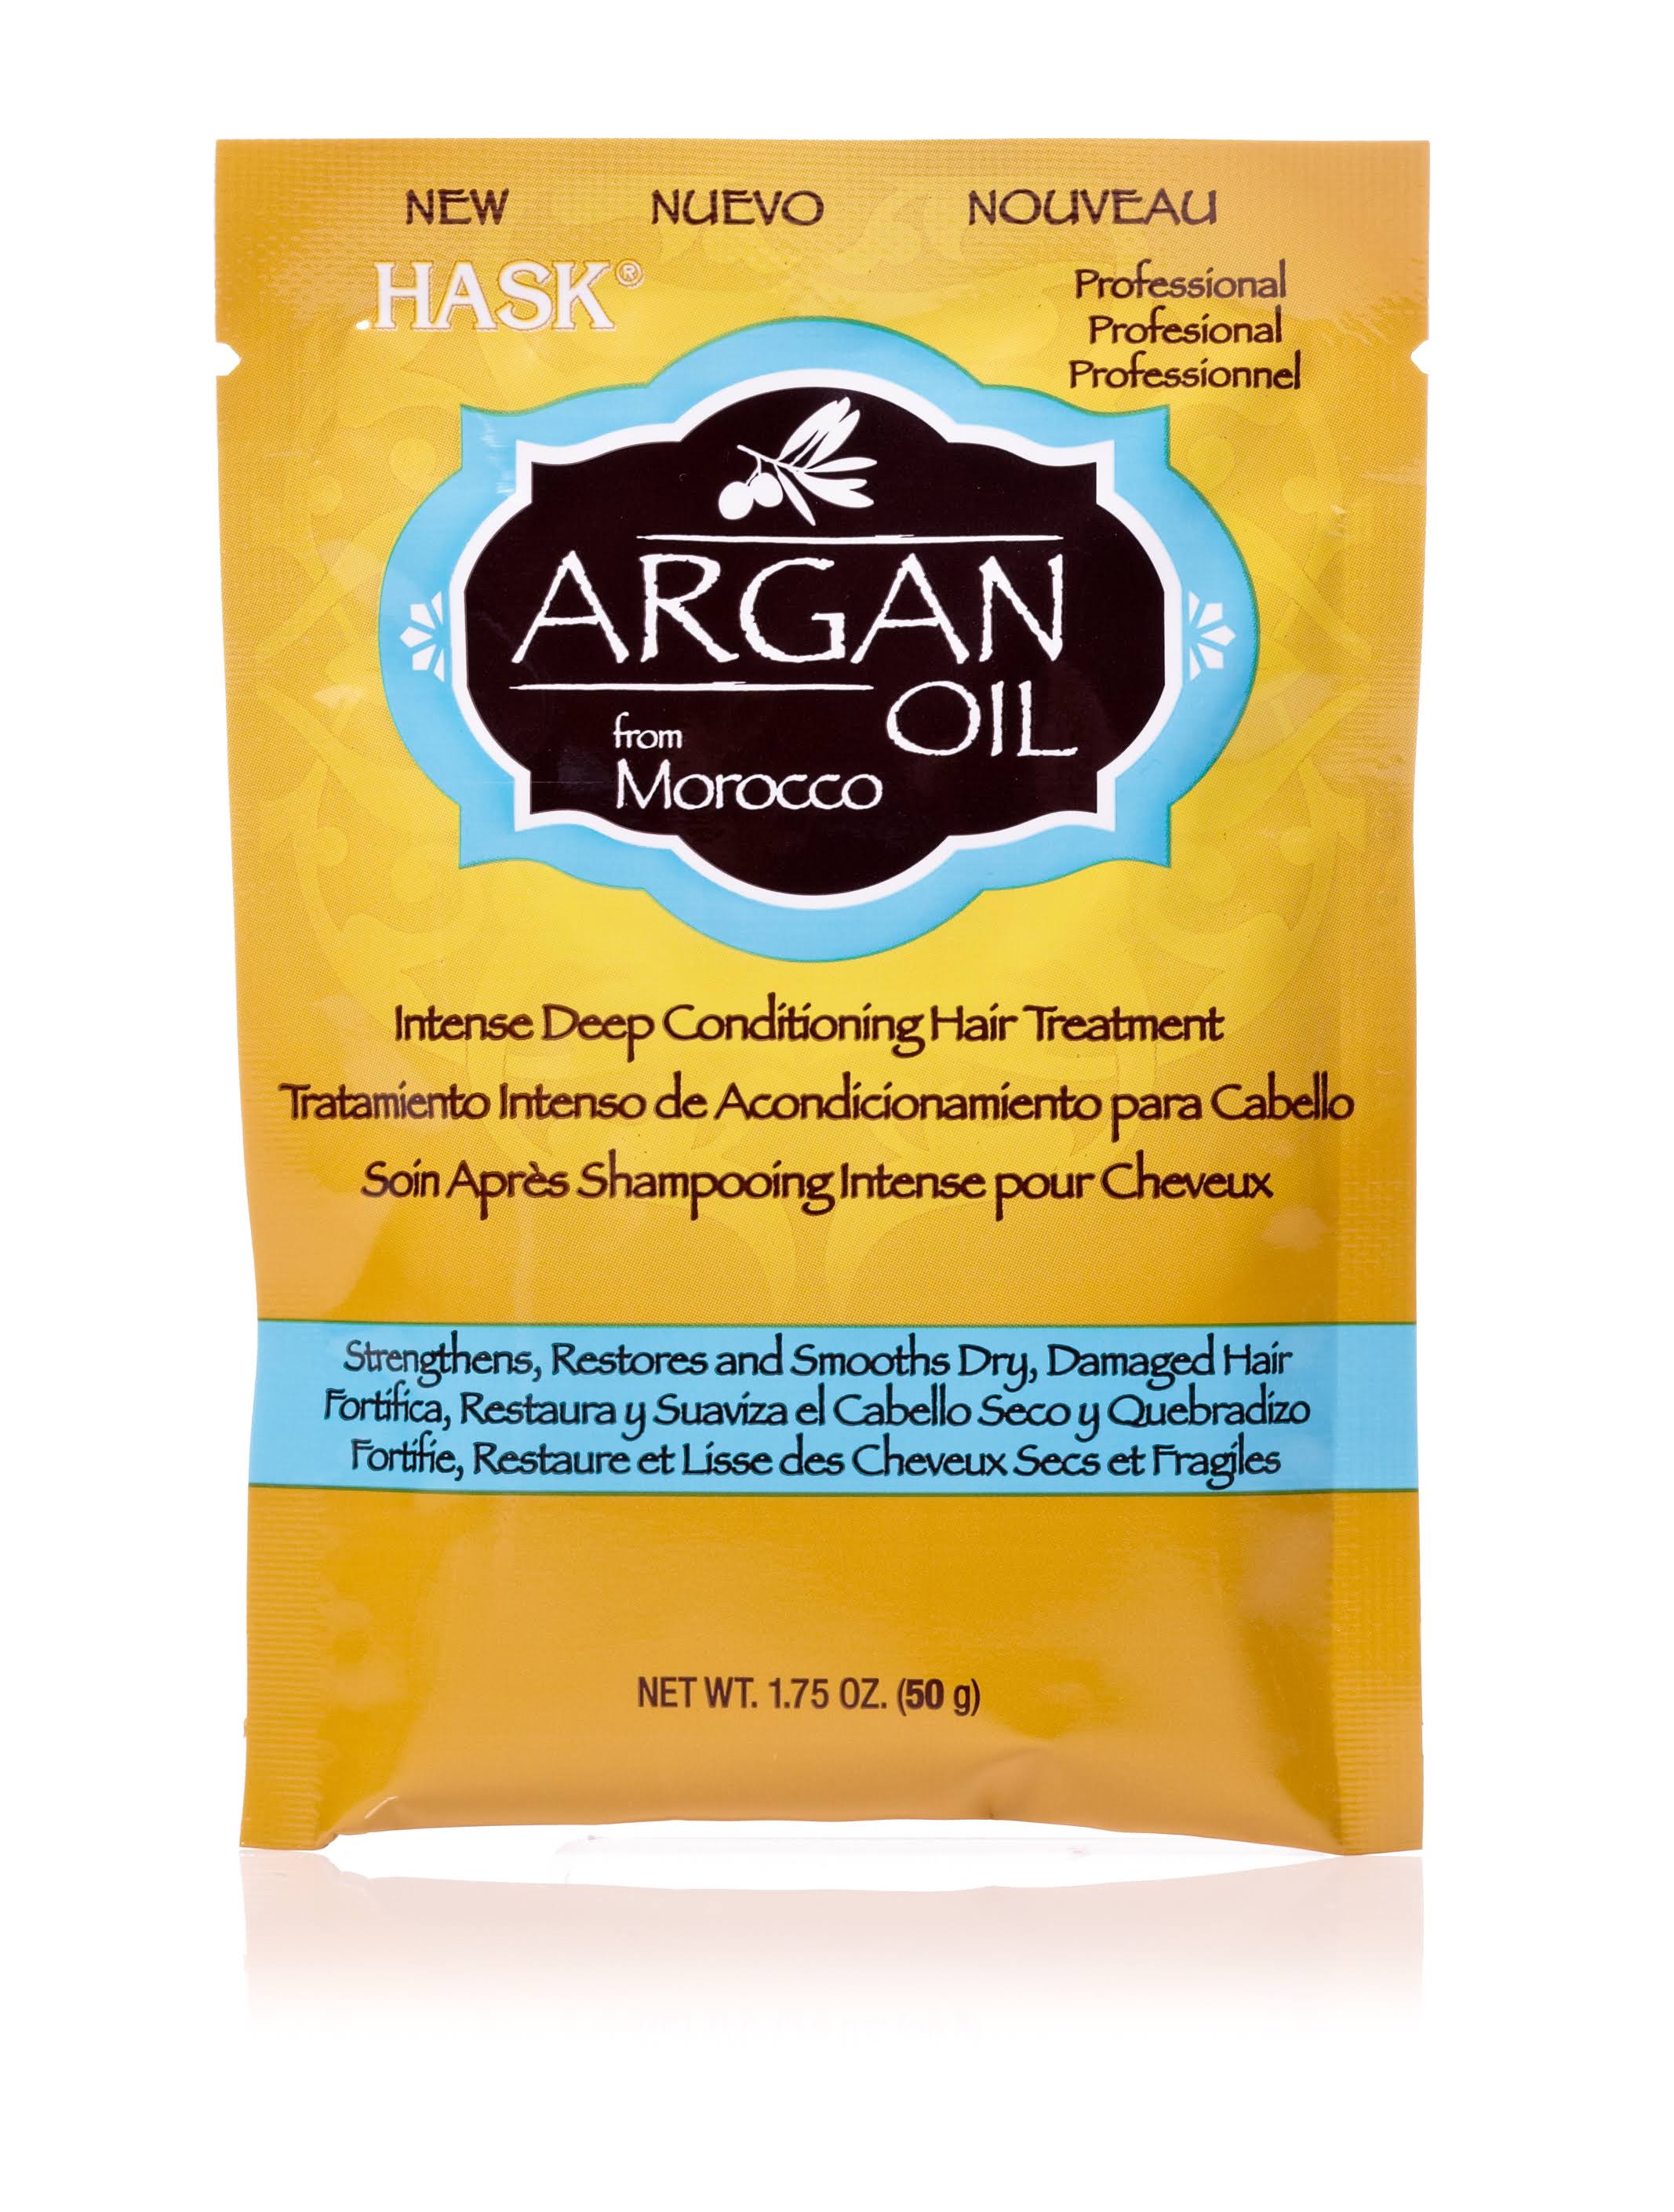 Hask Argan Oil Deep Conditioning Treatment - 1.75 oz packet